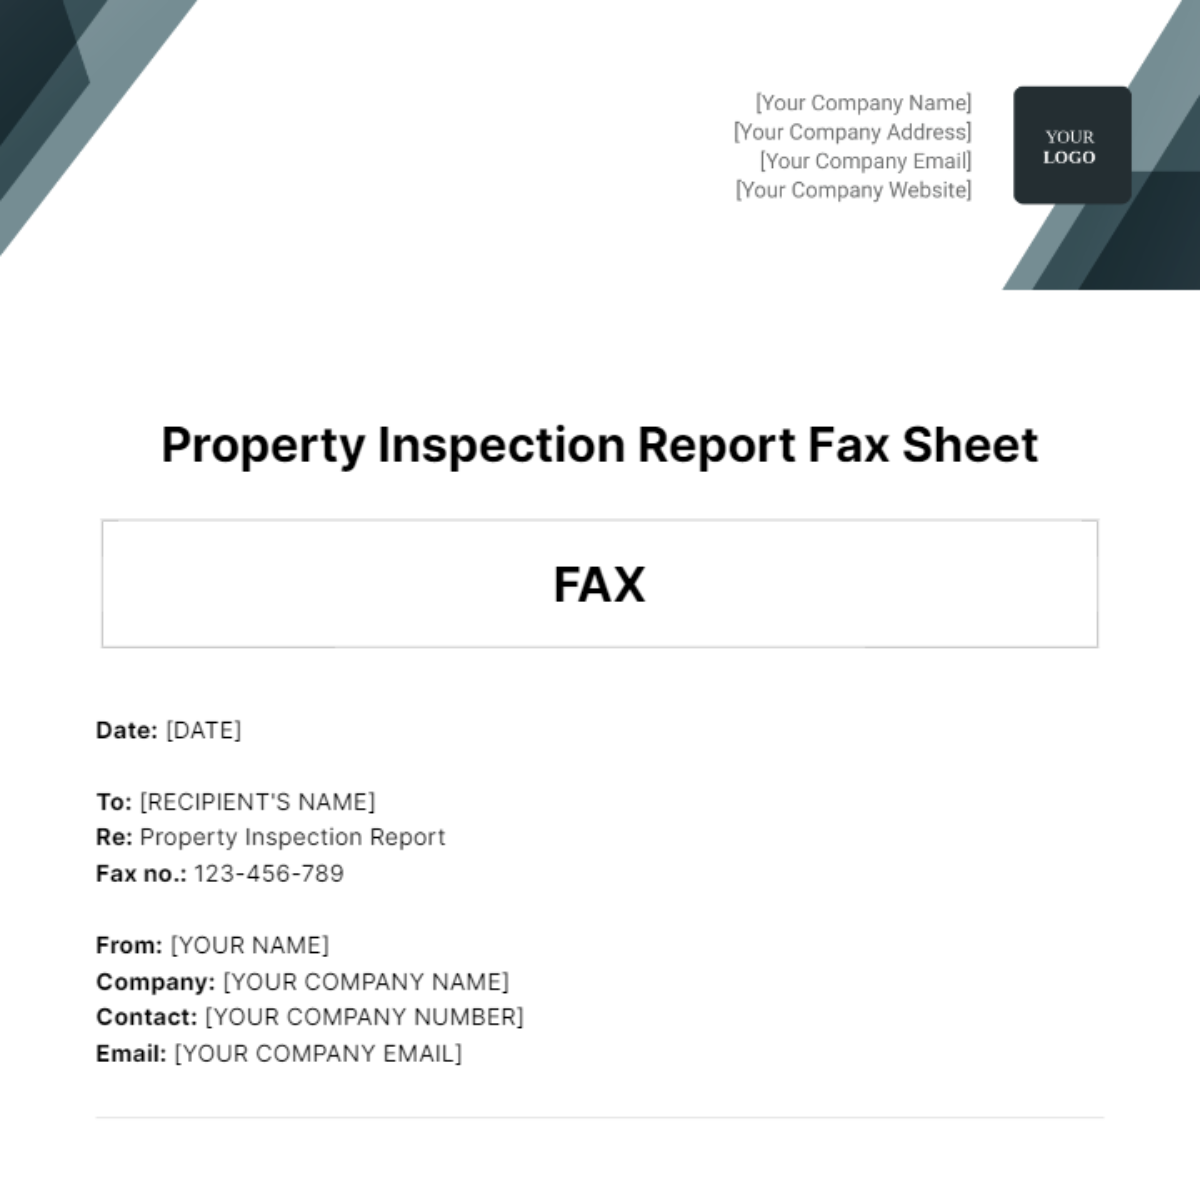 Property Inspection Report Fax Sheet Template